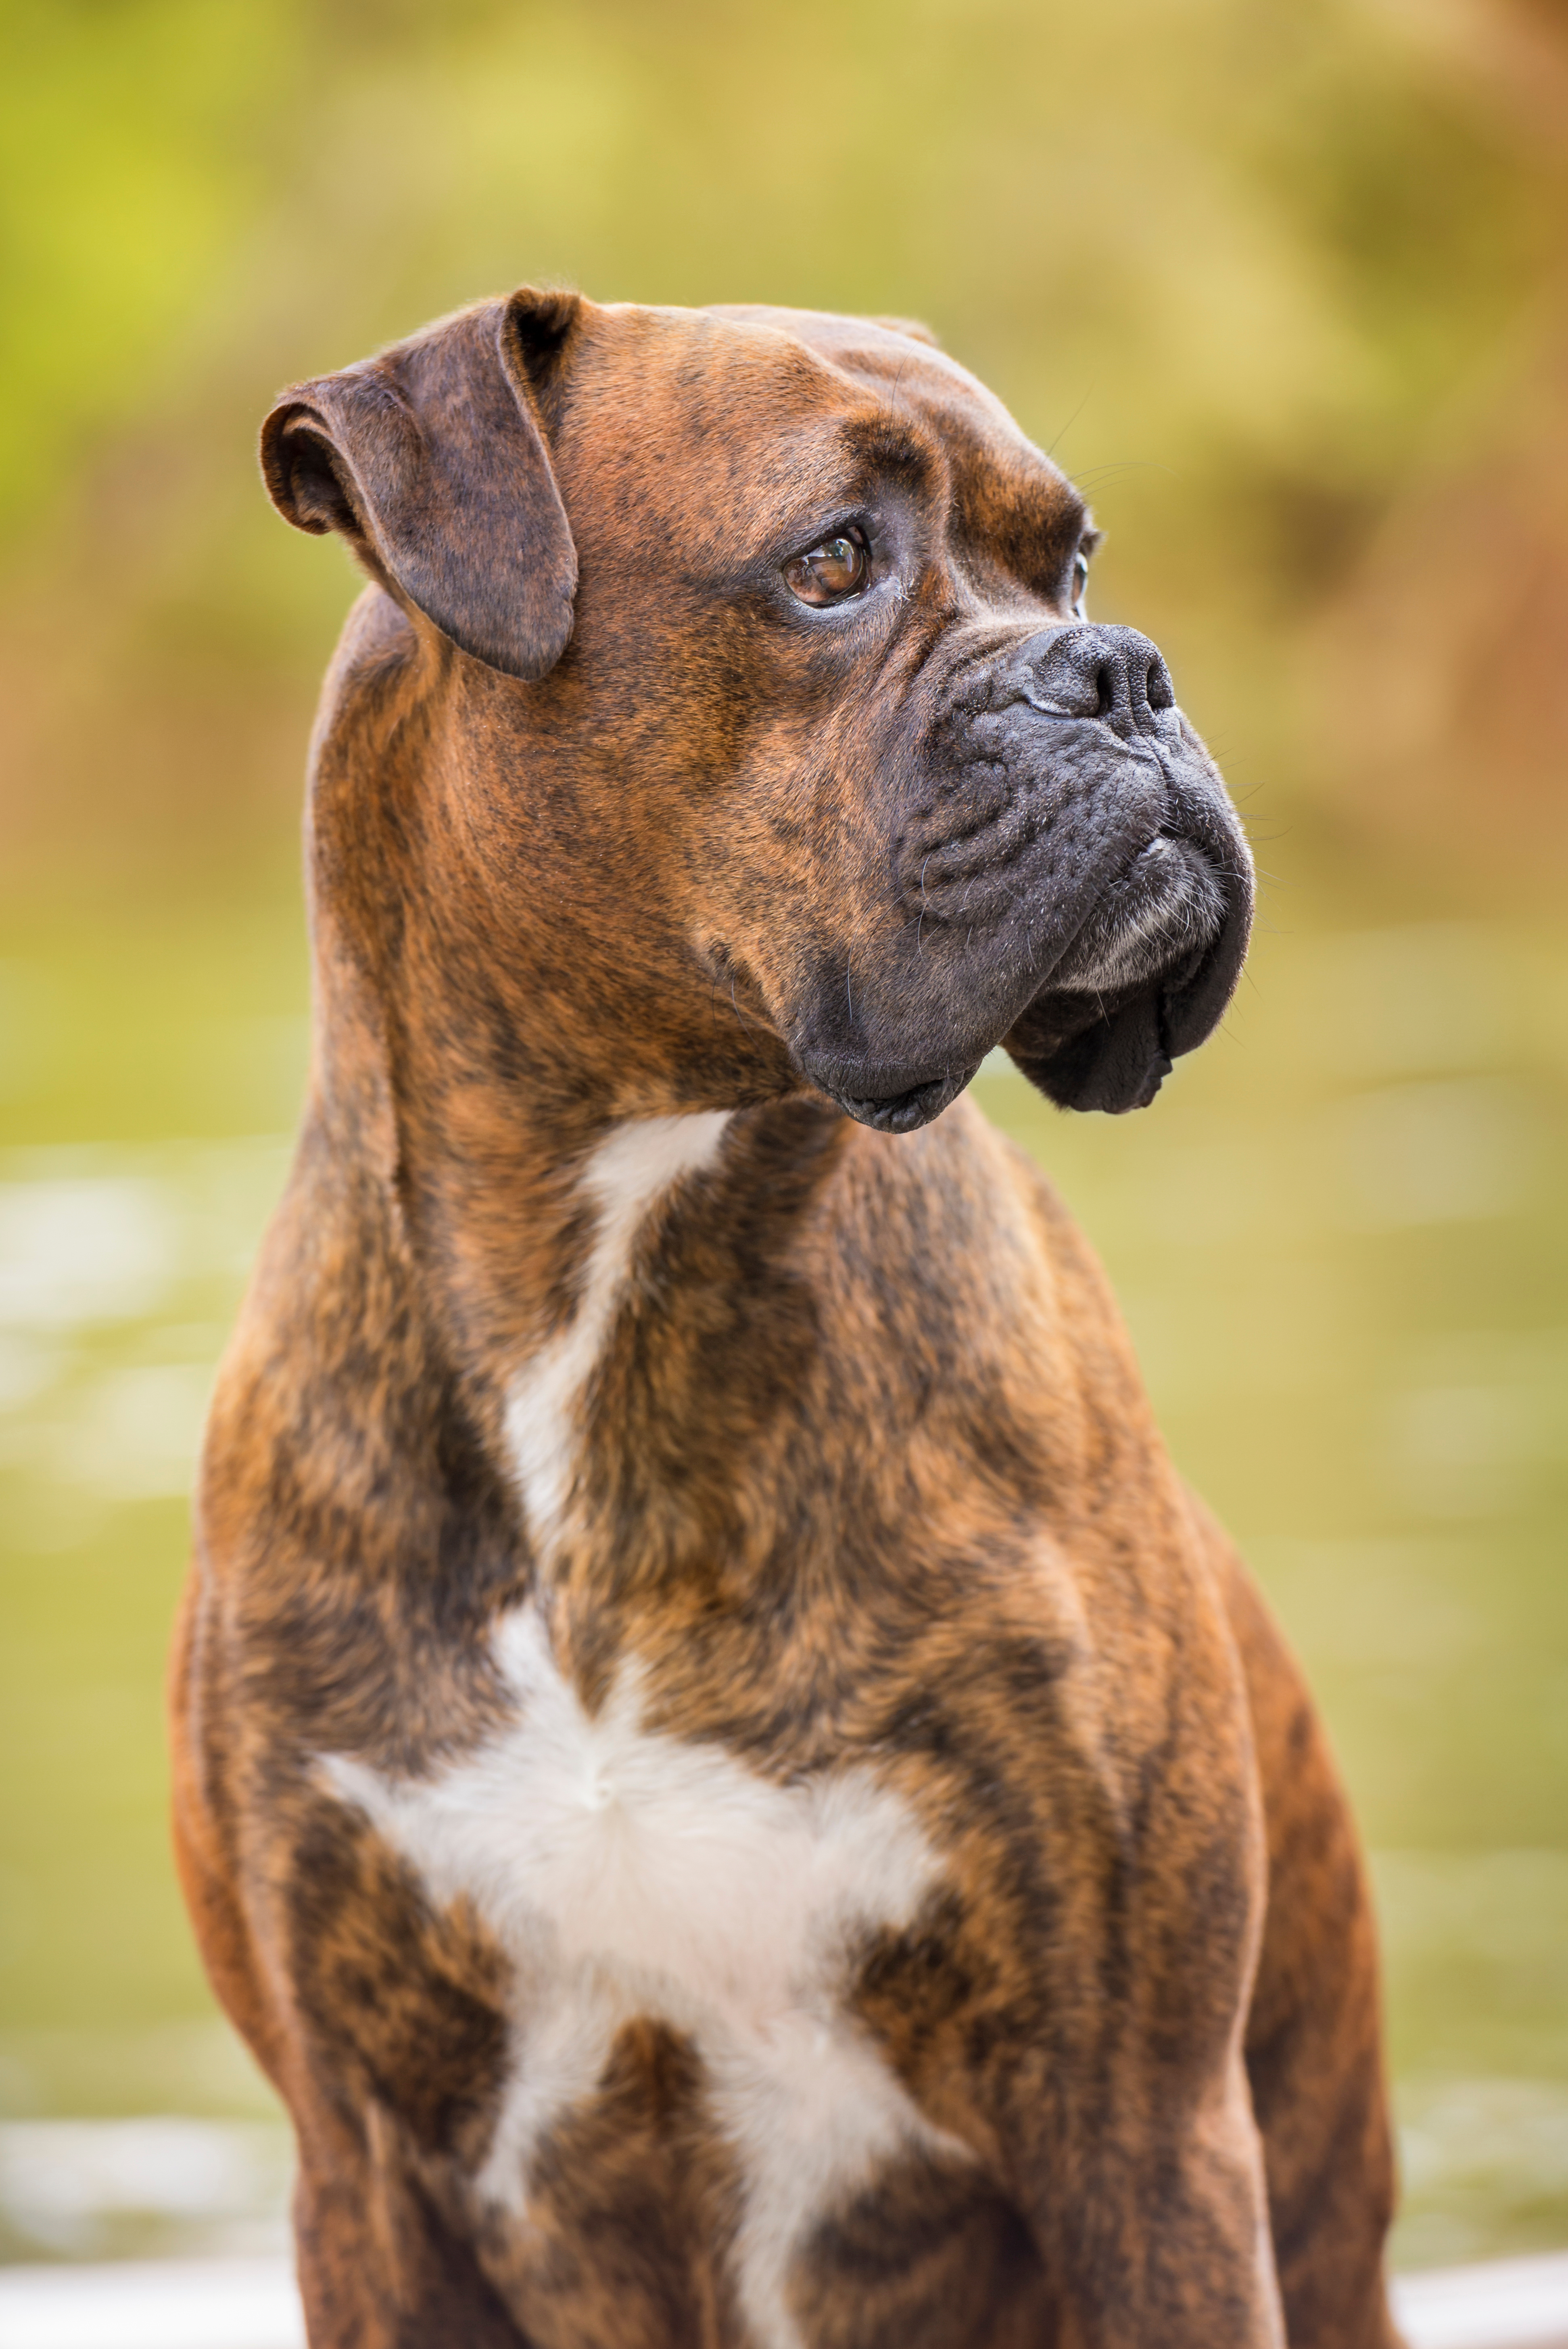 A trained boxer dog - Dog Training Elite Northern Utah is the best choice for boxer dog training in Davis / Weber County, UT!